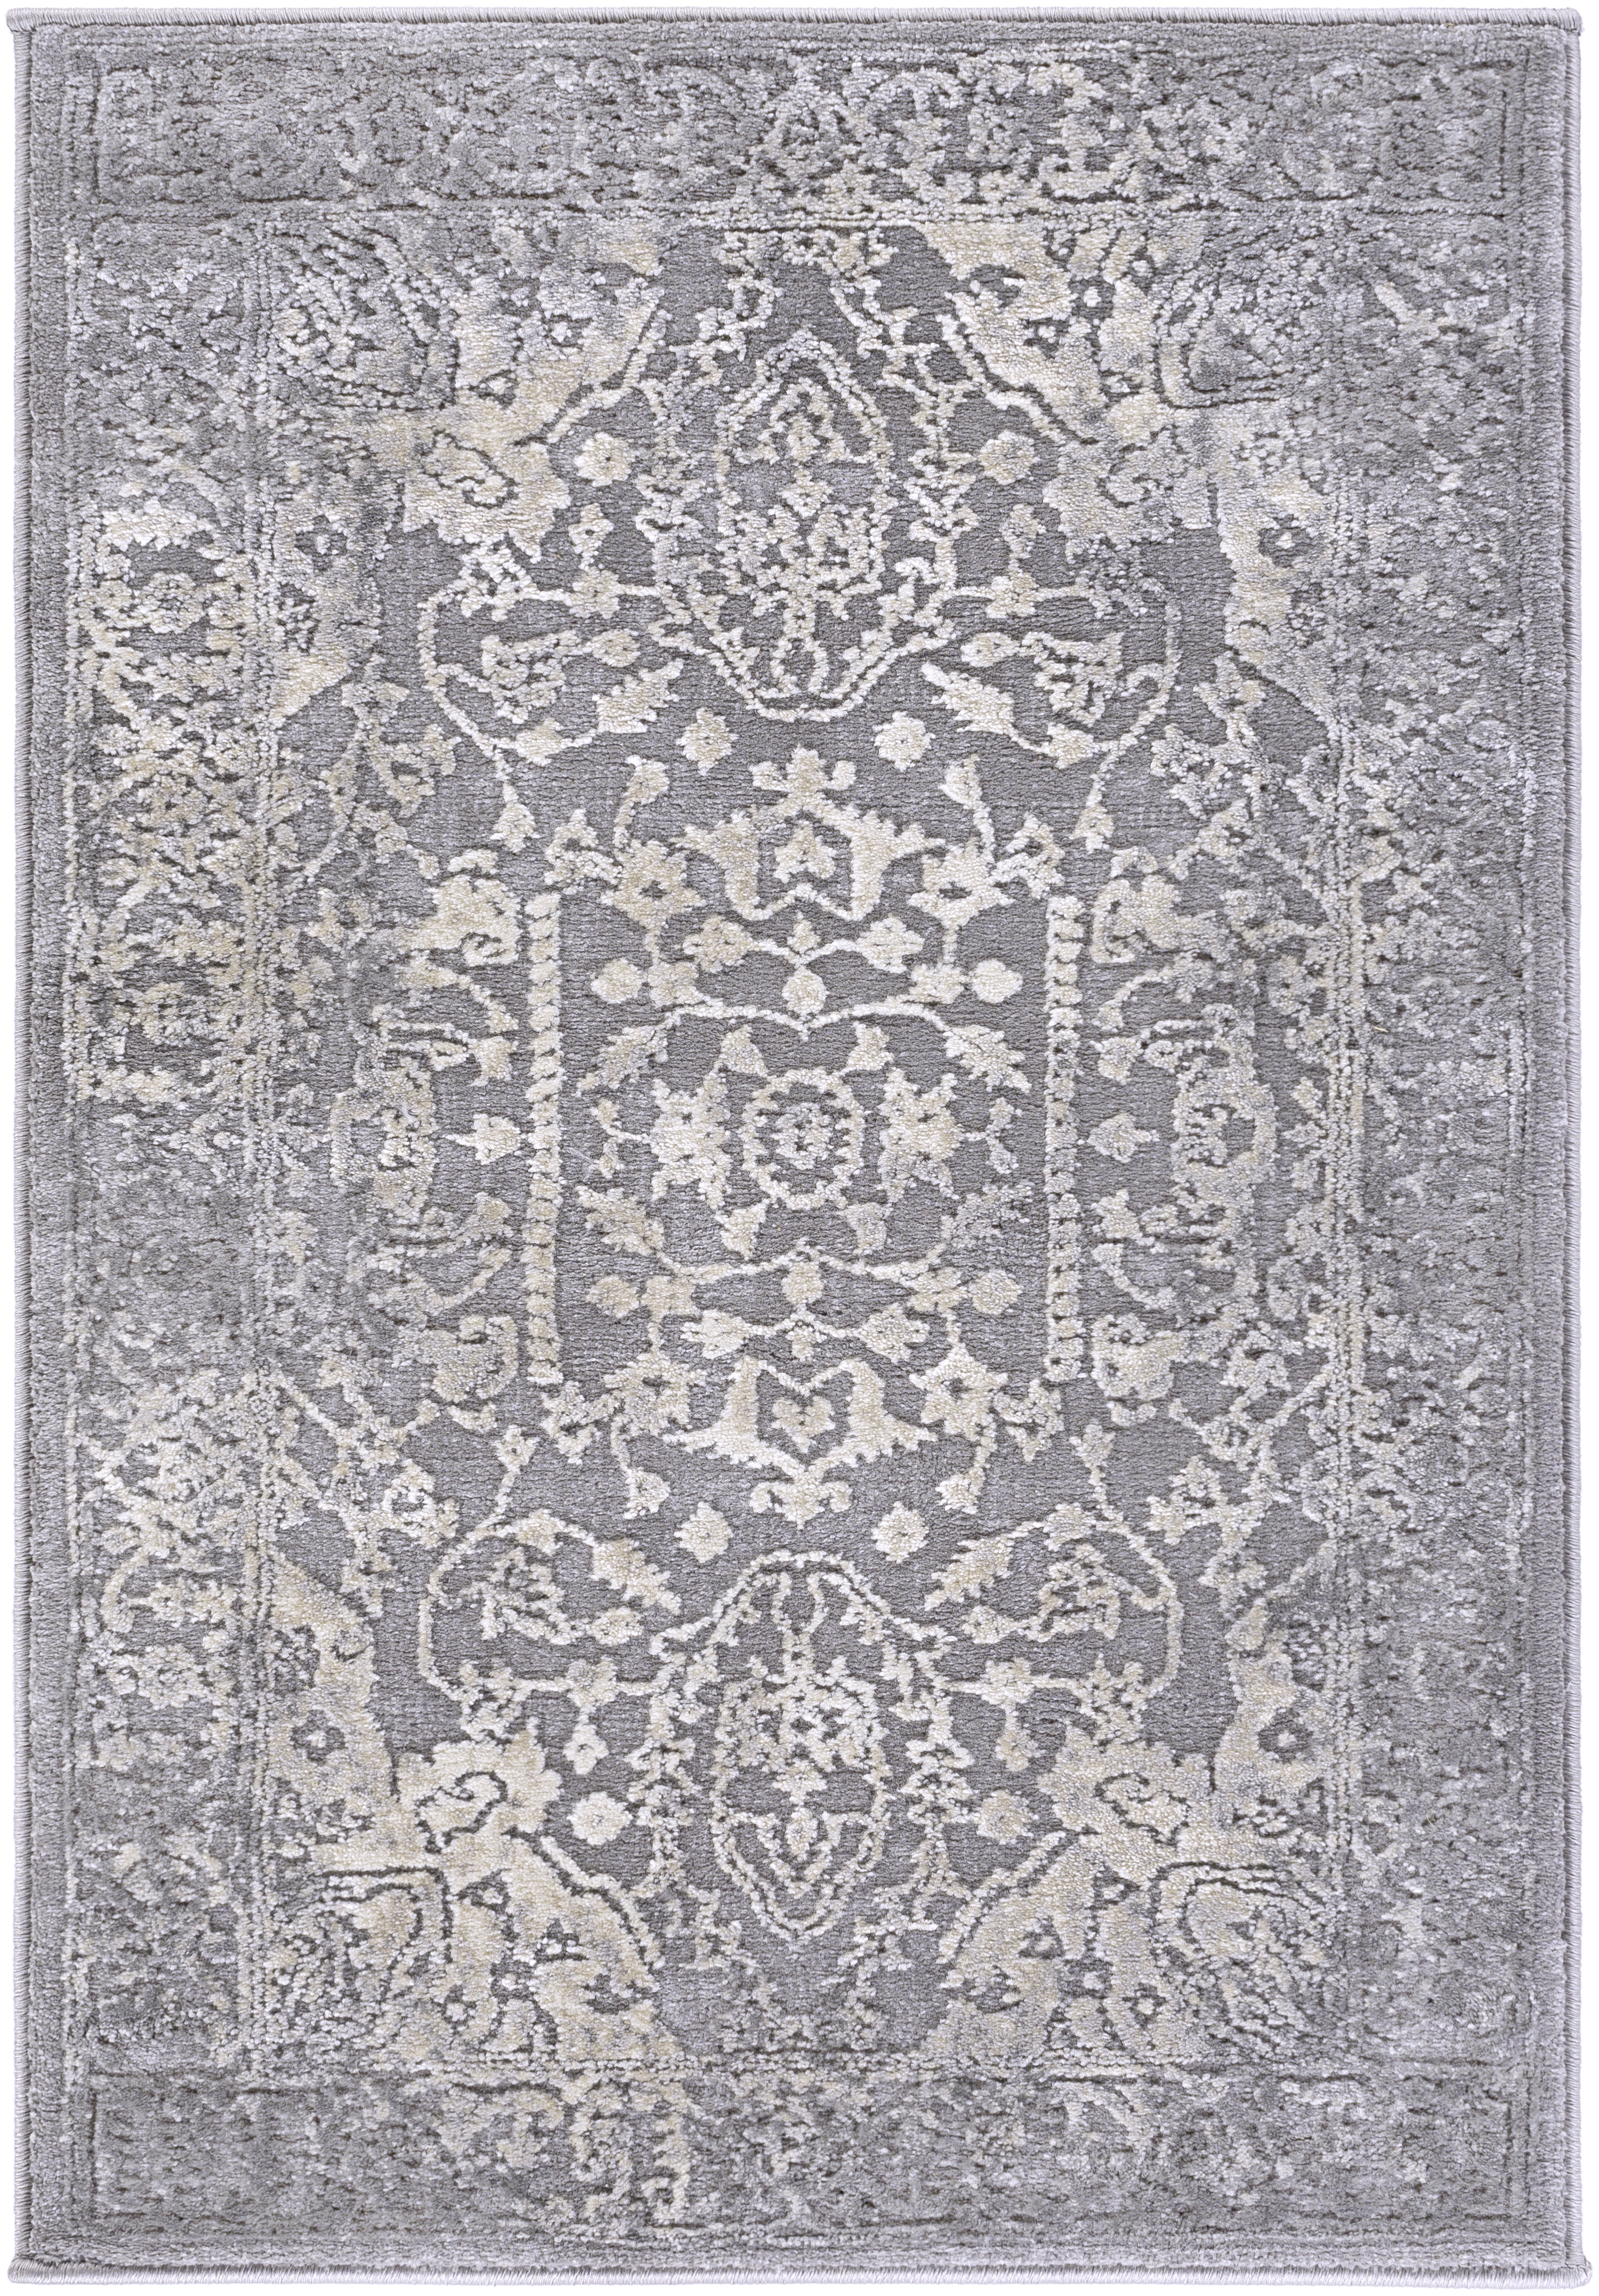 7'10" Area Rugs Tbt2300-710sq